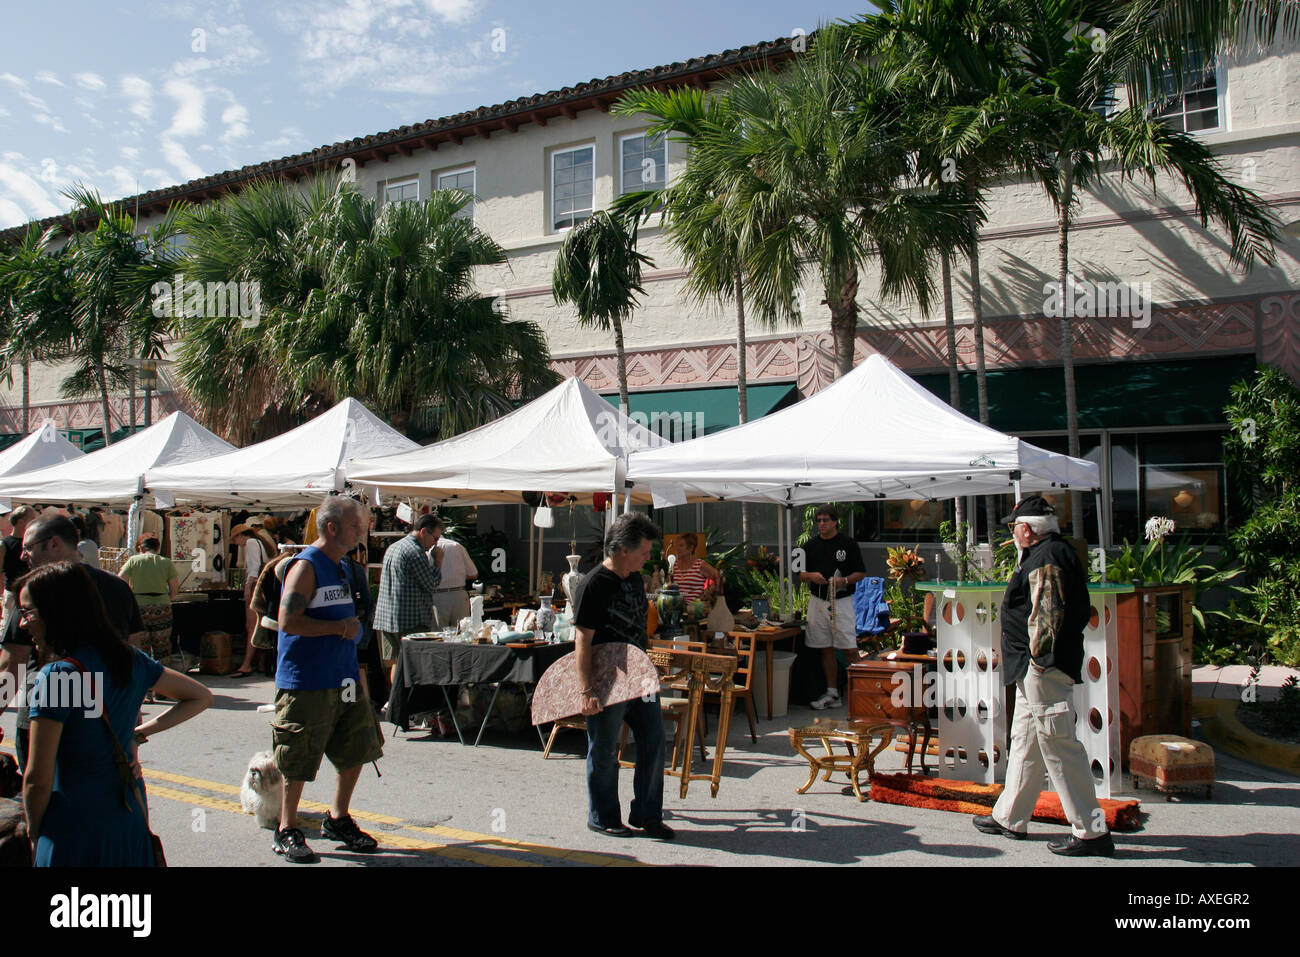 Miami Beach Florida,Lincoln Road Mall,Outdoor Antique and Collectibles Market,shopping shopper shoppers magasins marché achats s Banque D'Images